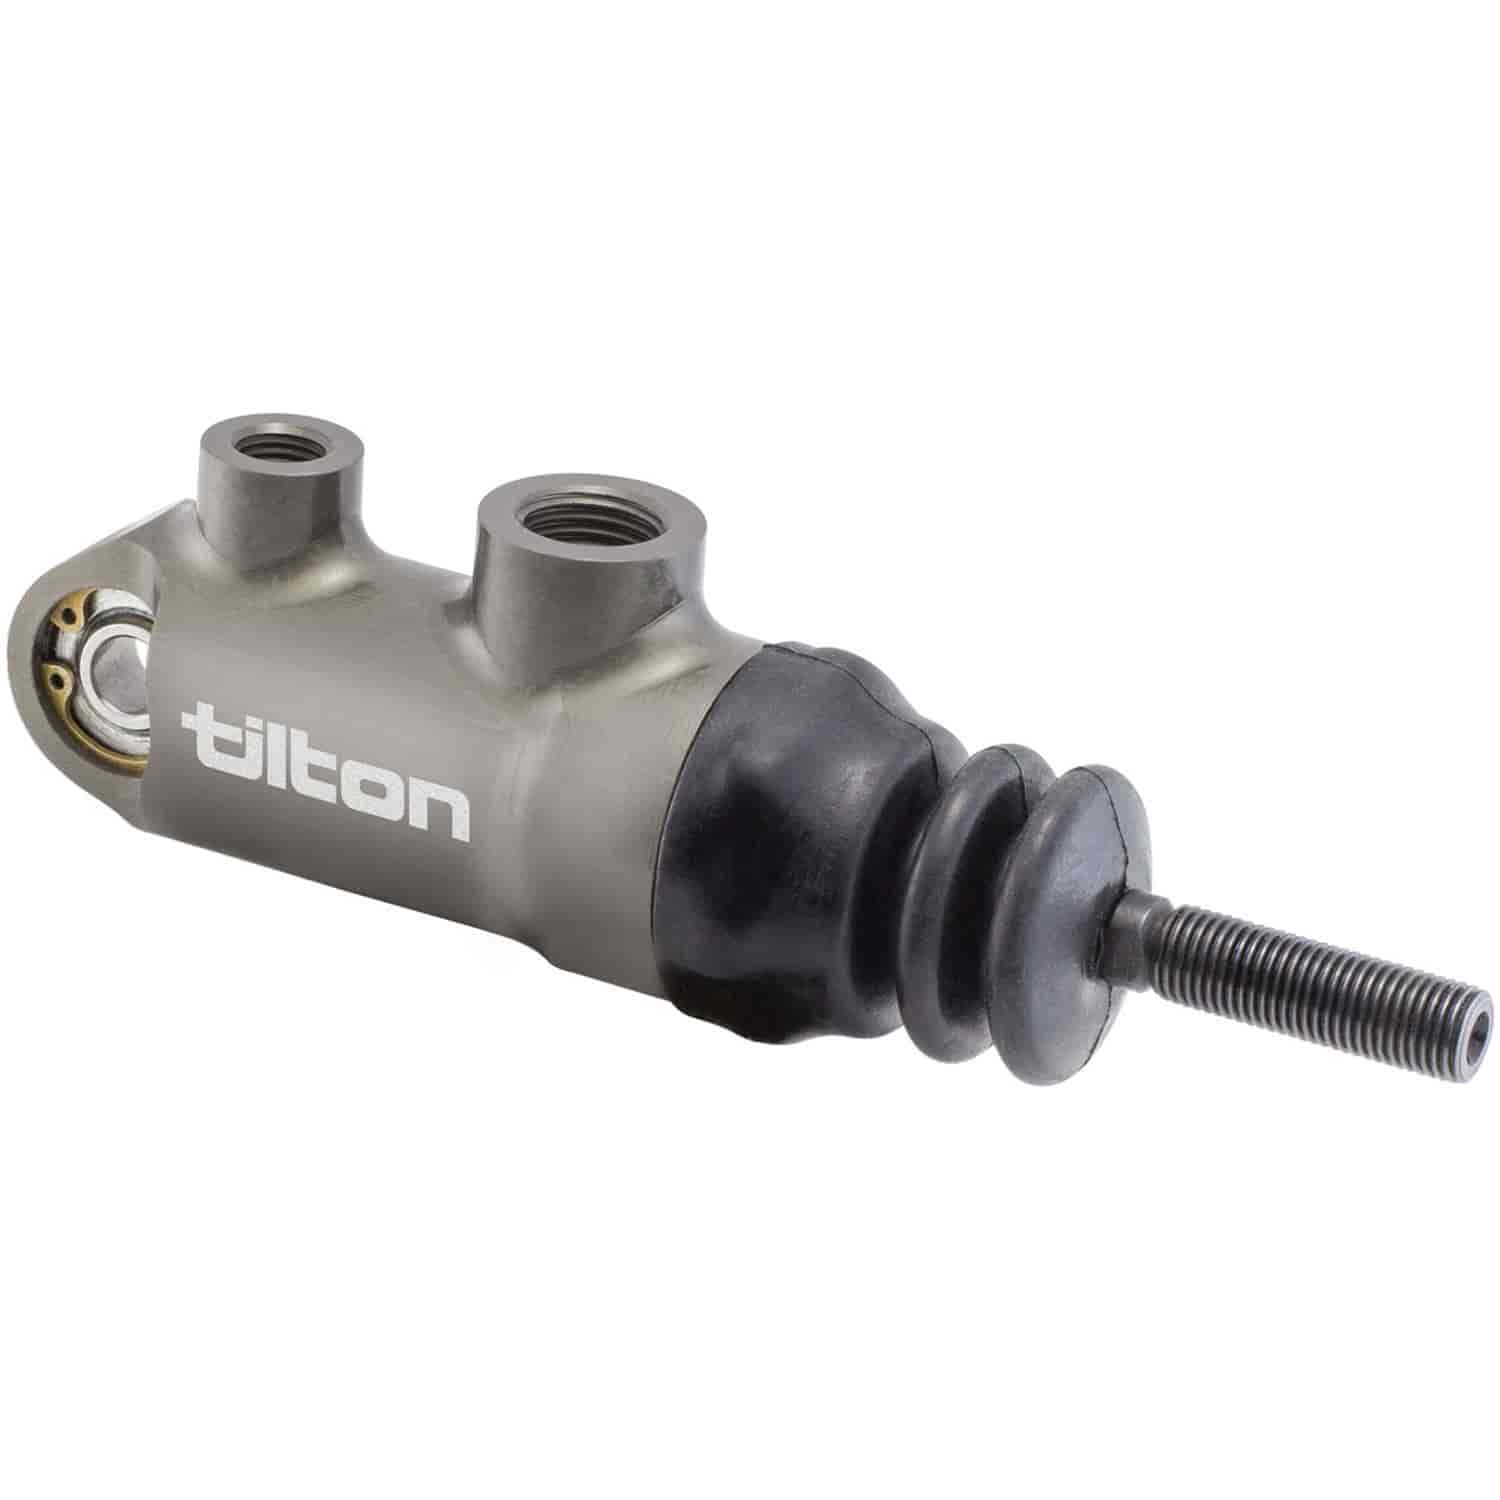 78-Series Master Cylinder 5/8" Bore